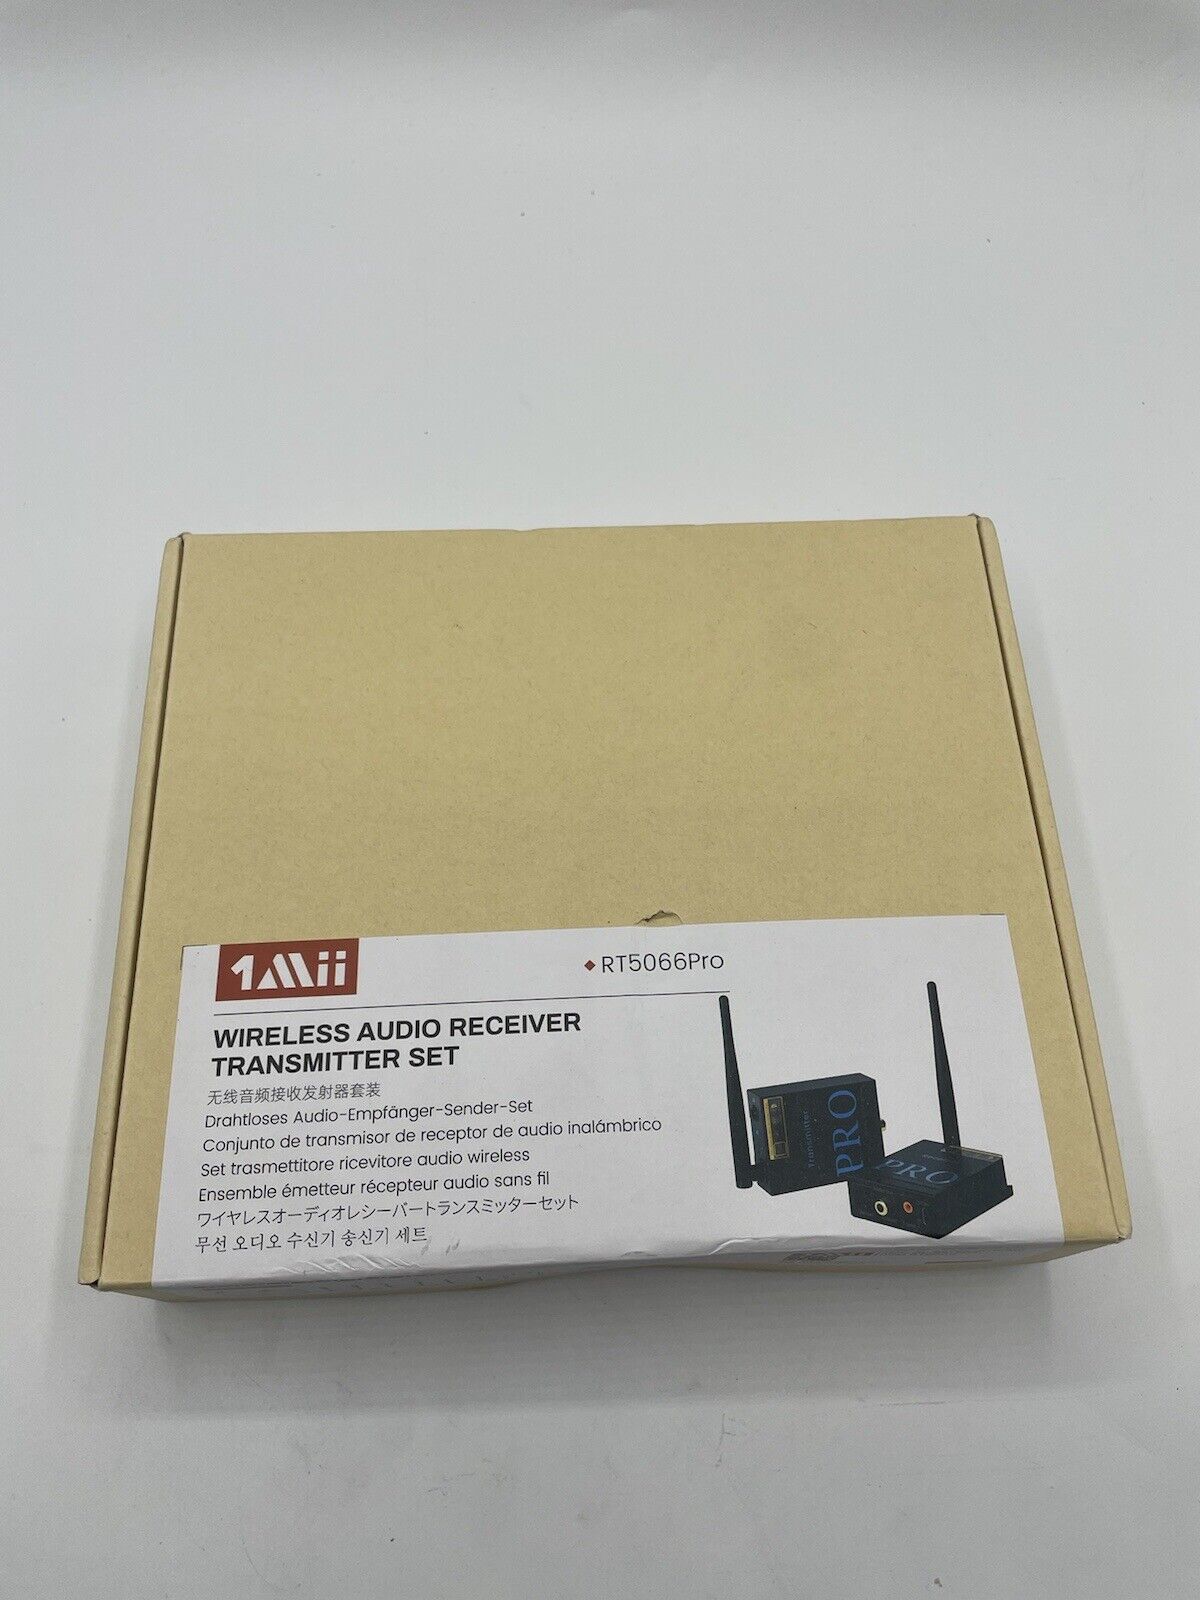 1Mii 2.4GHz RT5066PRO Wireless Audio Transmitter and Receiver Set